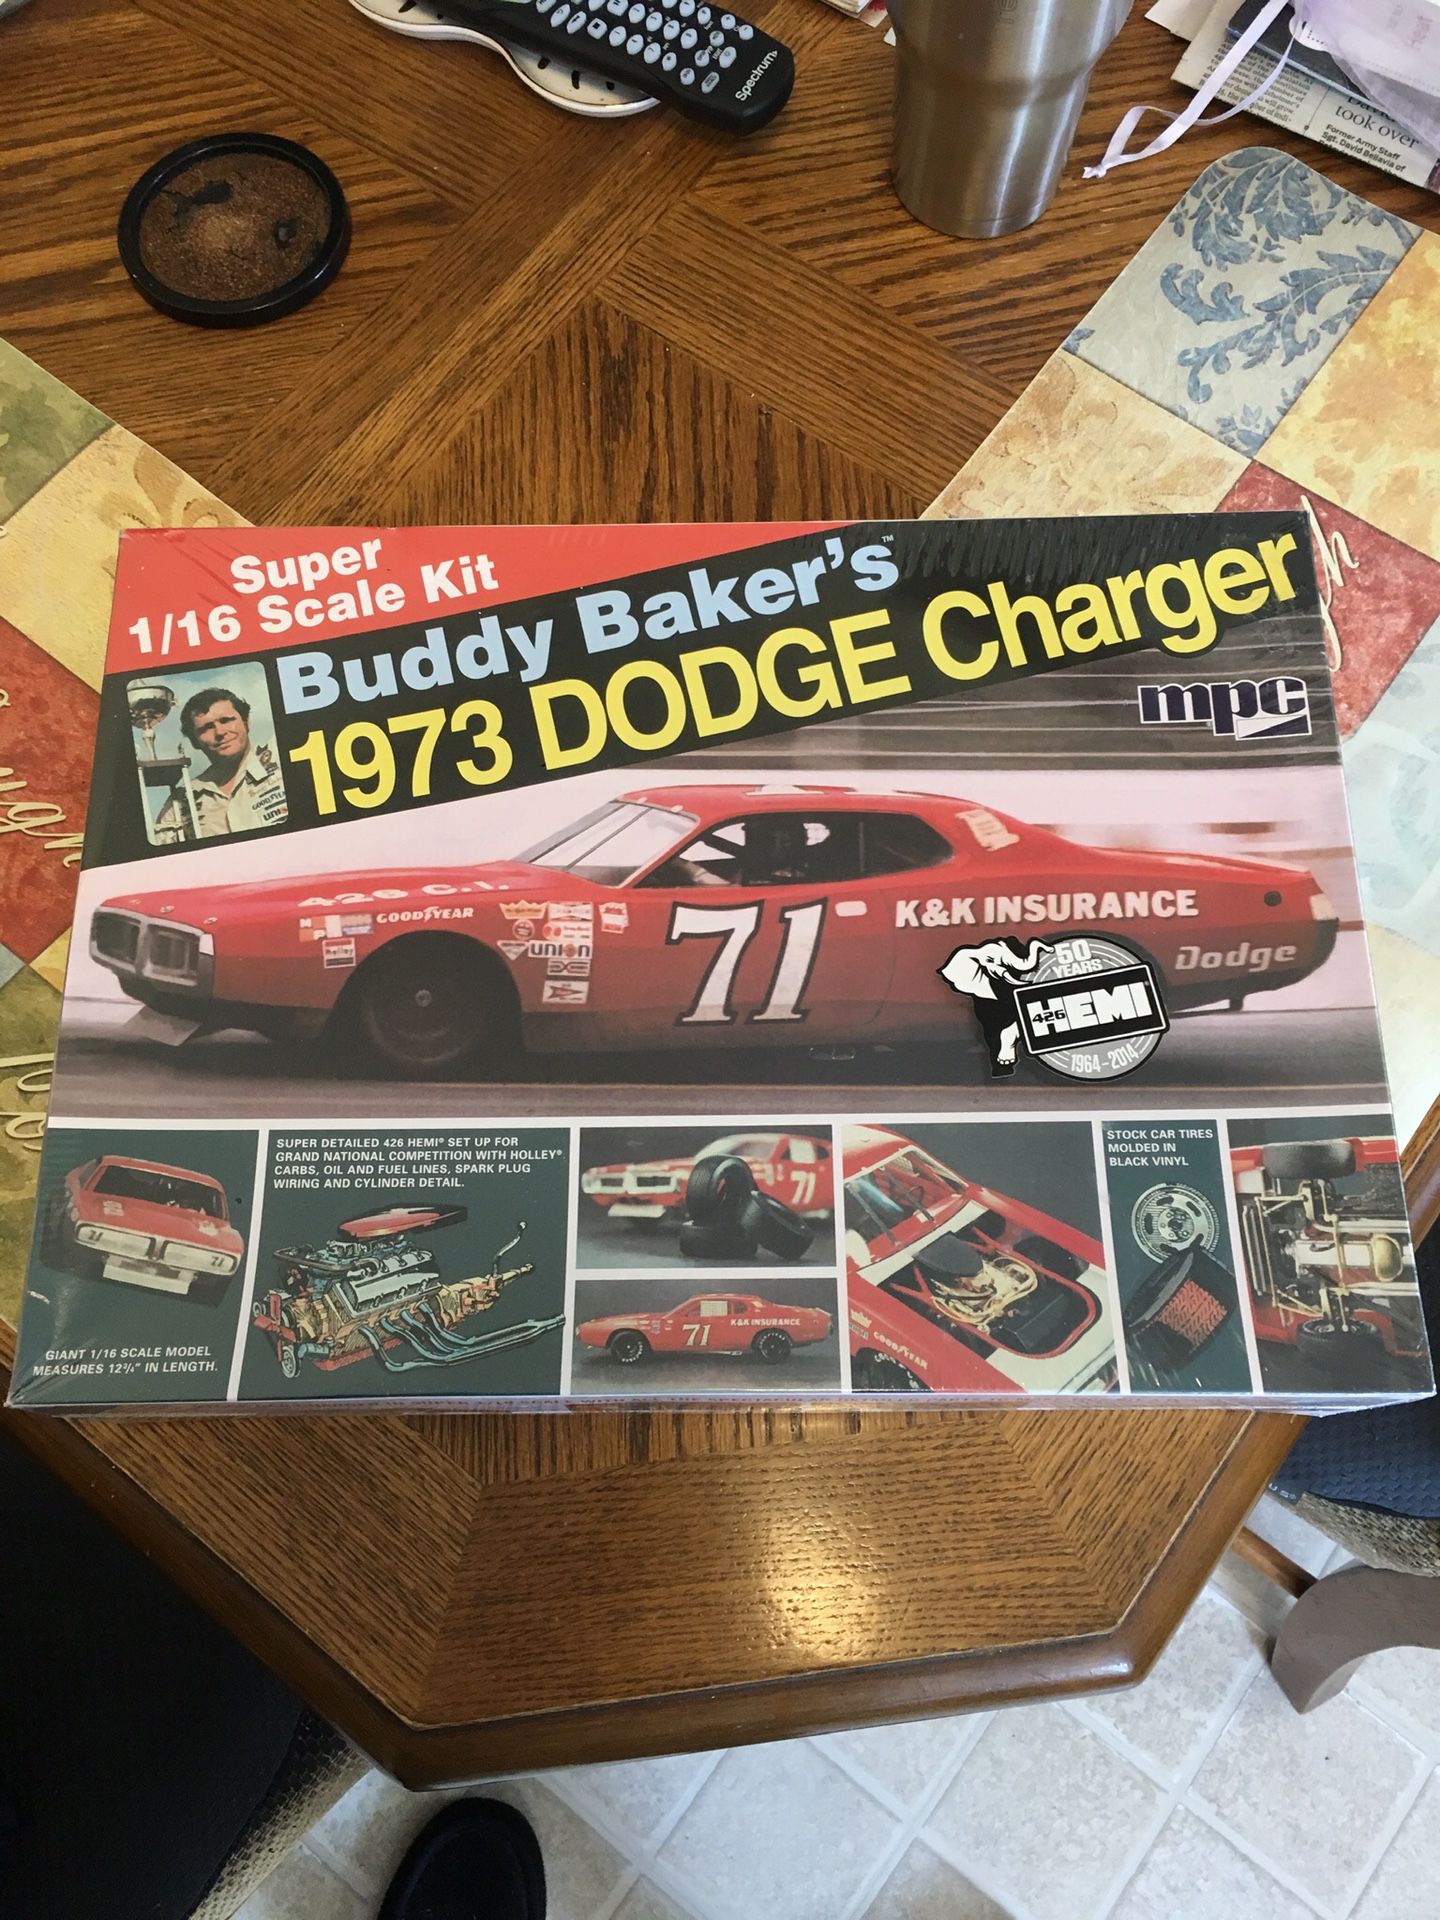 1/16 Scale Buddy Baker’s 1973 Dodge Charger